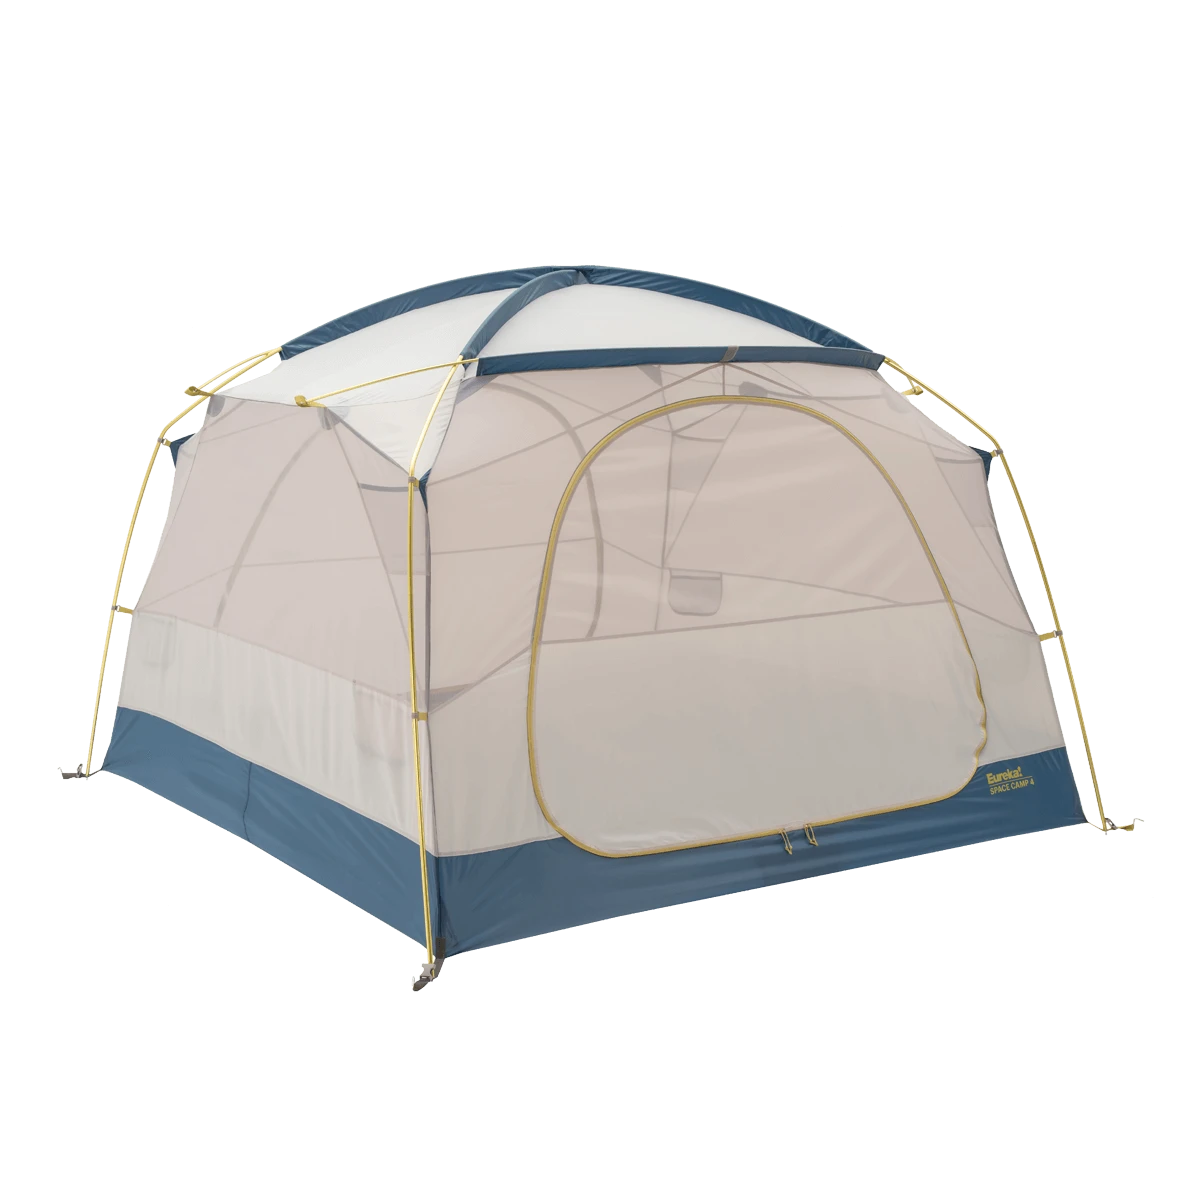 Space Camp 4 Tent without rainfly